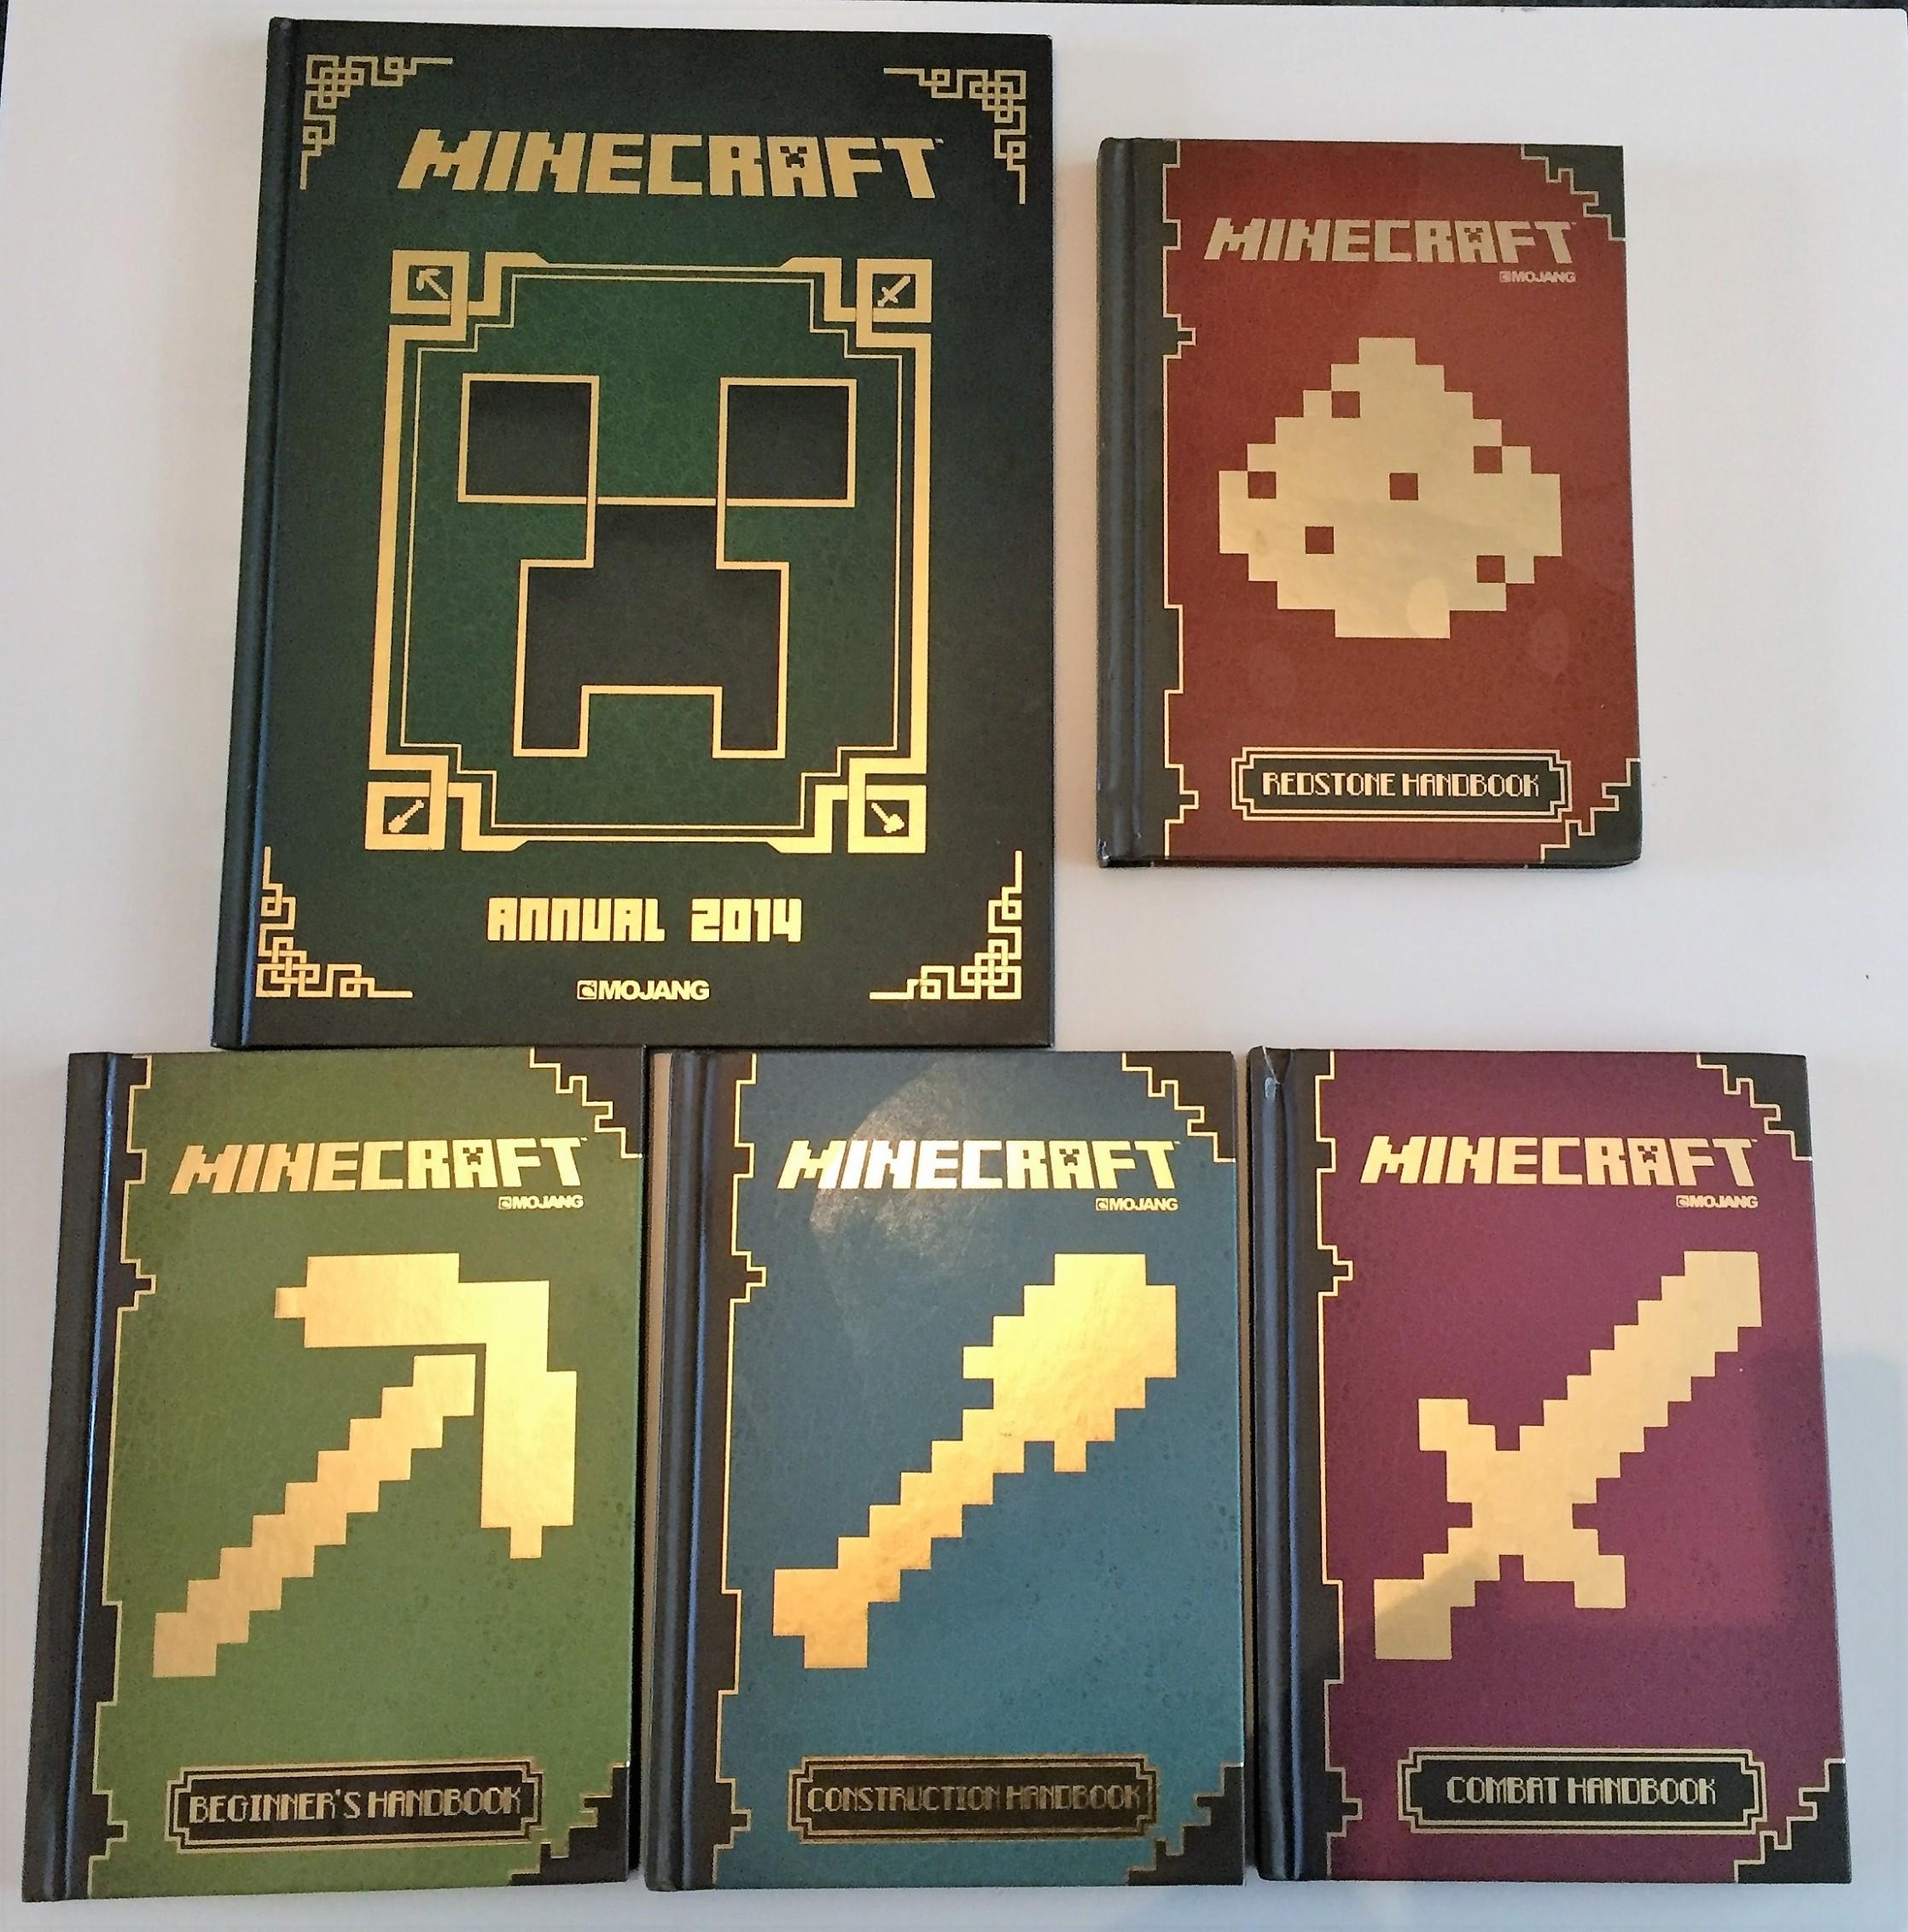 Set of Minecraft books in PO15 Fareham for £12.00 for sale Shpock